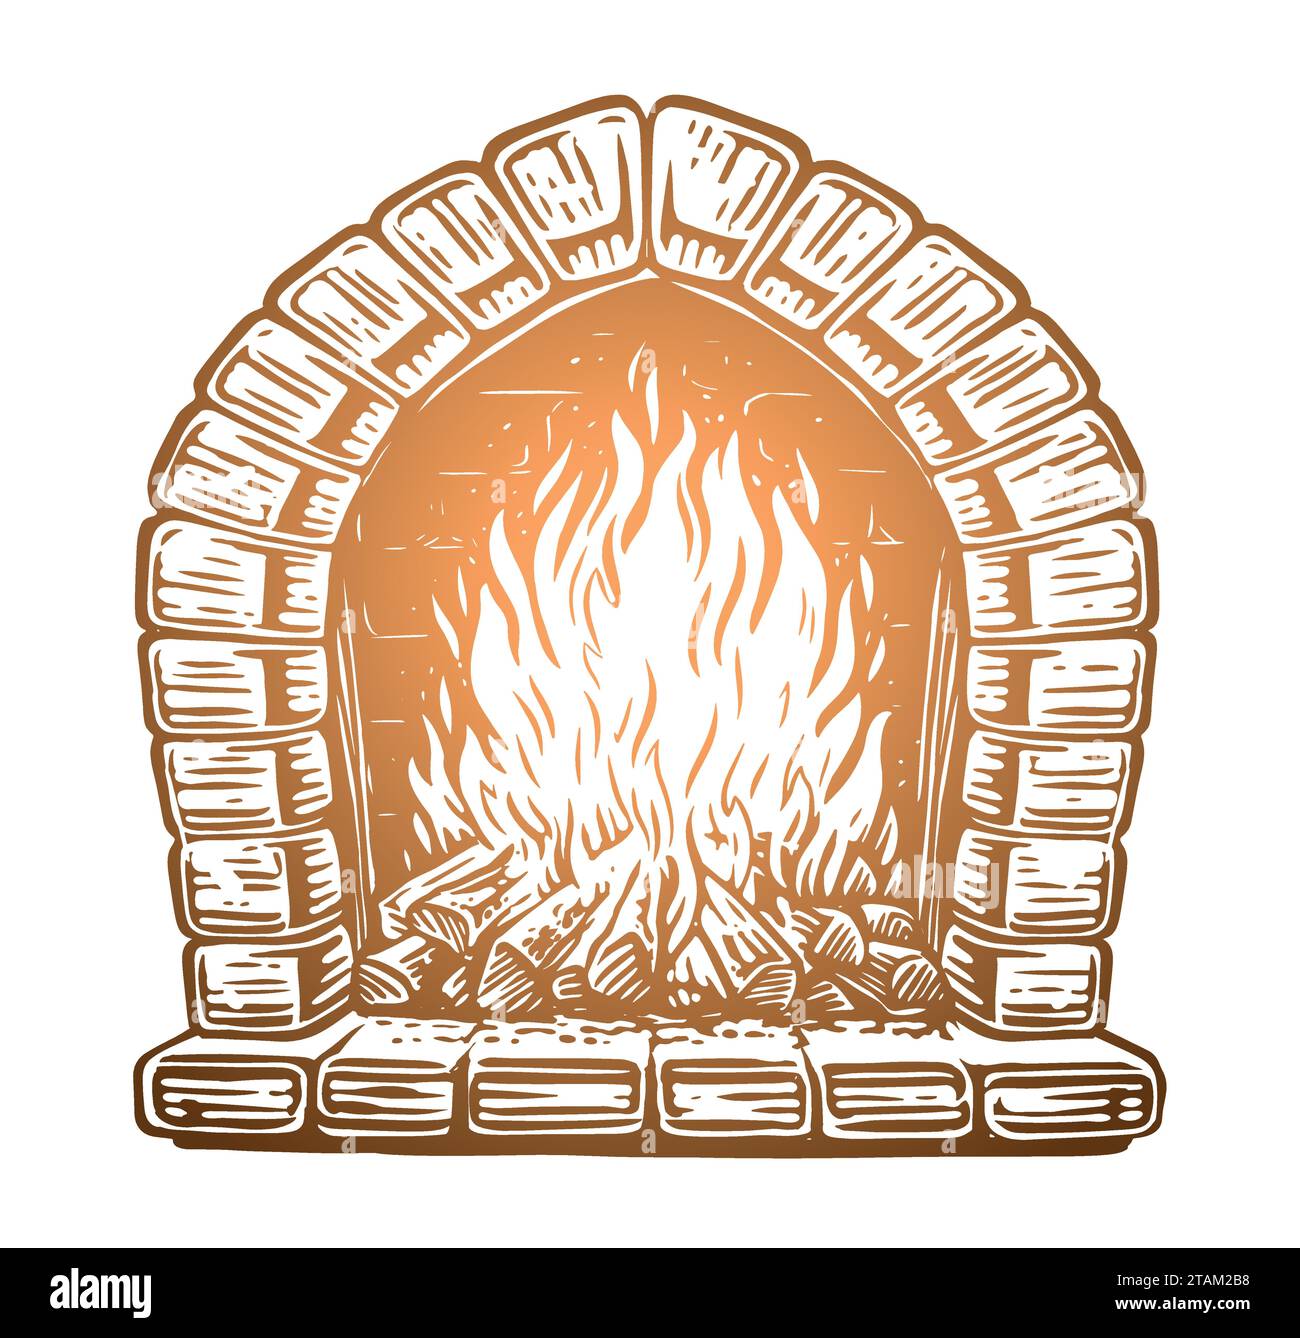 Wood is burning in fireplace. Fire in stone oven. Hand drawn vector illustration Stock Vector